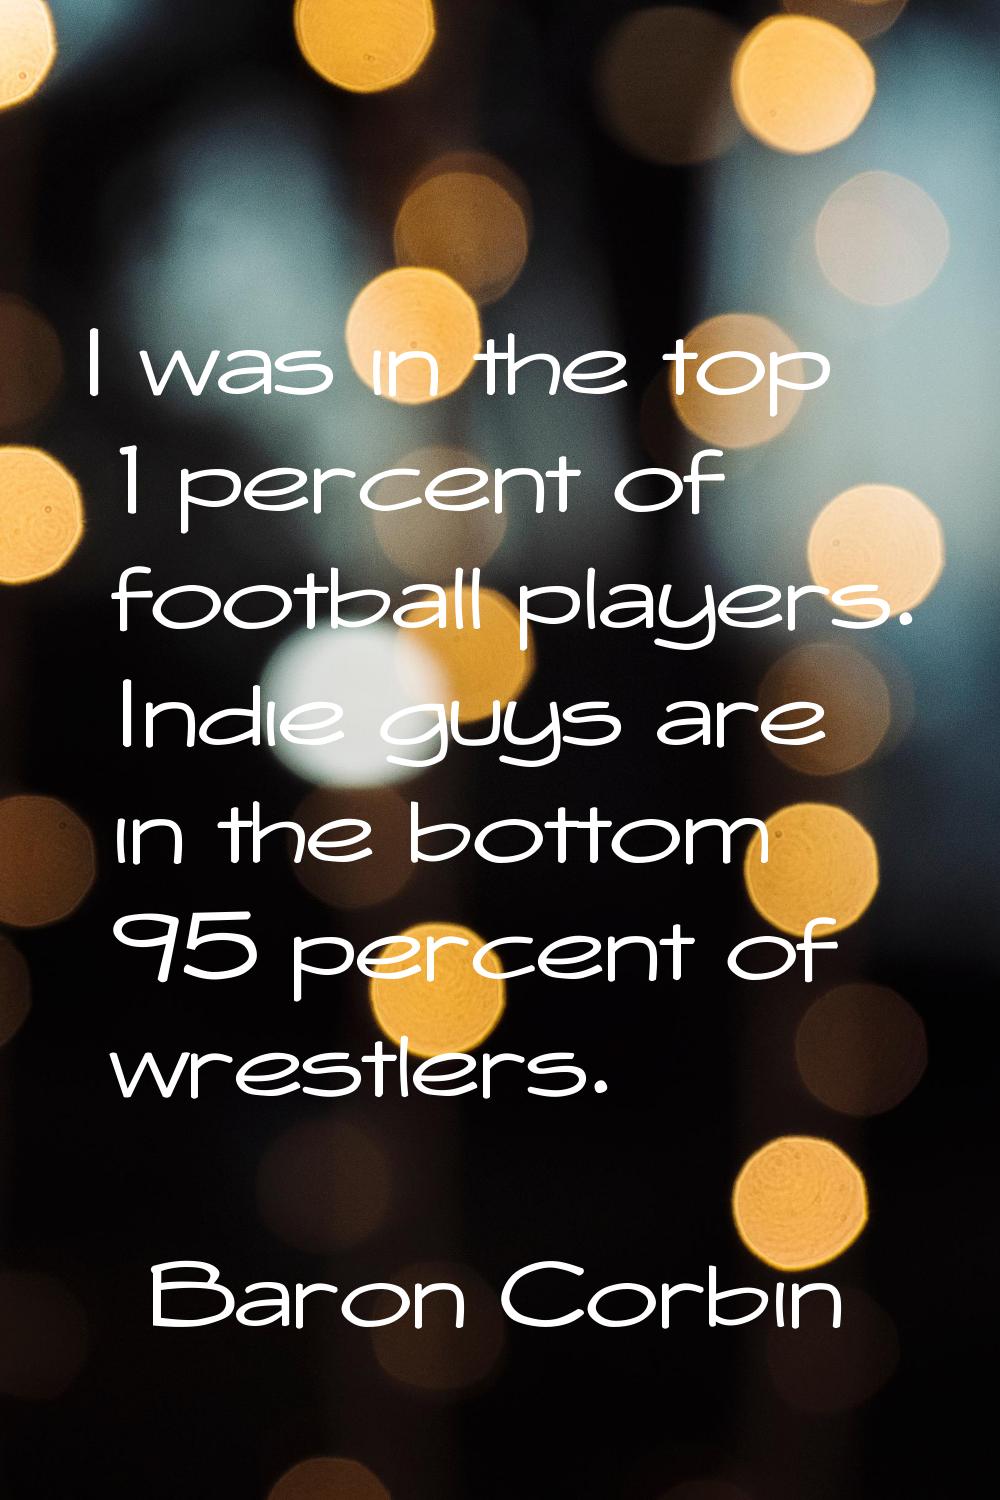 I was in the top 1 percent of football players. Indie guys are in the bottom 95 percent of wrestler